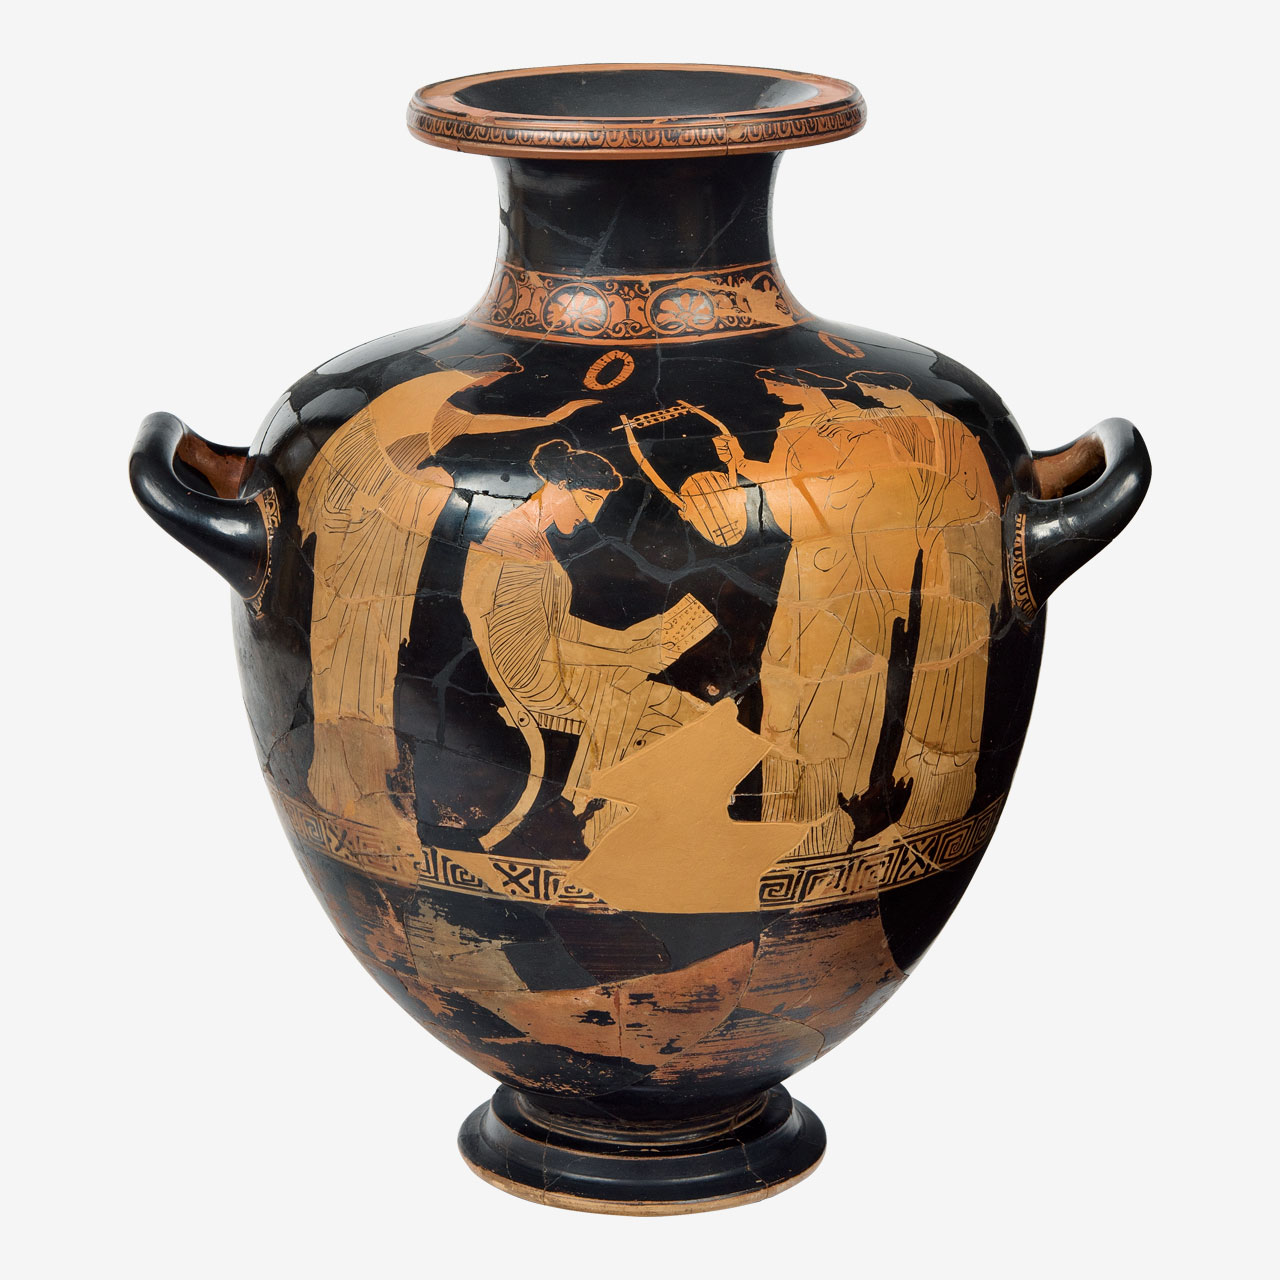 Clay red-figured hydria with depiction of Sappho.